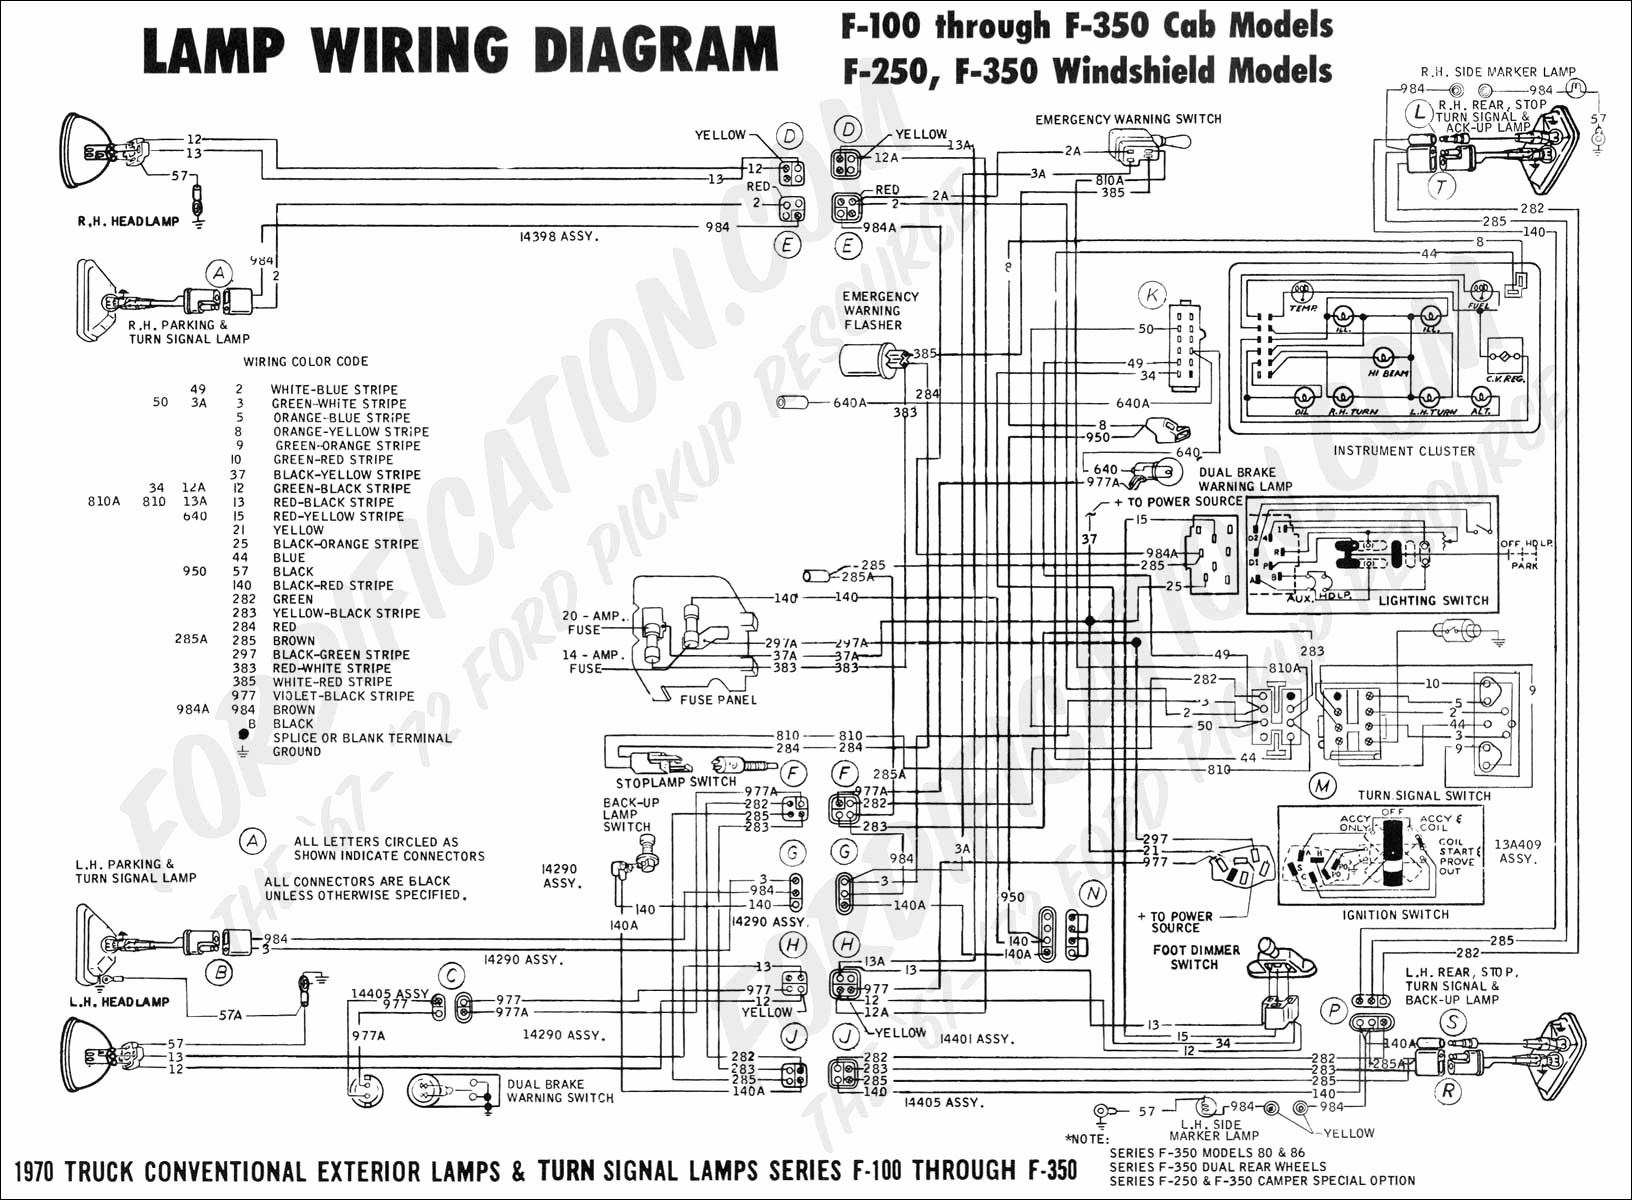 ford glow plug controller wiring diagram for 1993 data wiring rh kwintesencja co 6 5 glow plug controller wiring diagram 6 5 glow plug controller wiring